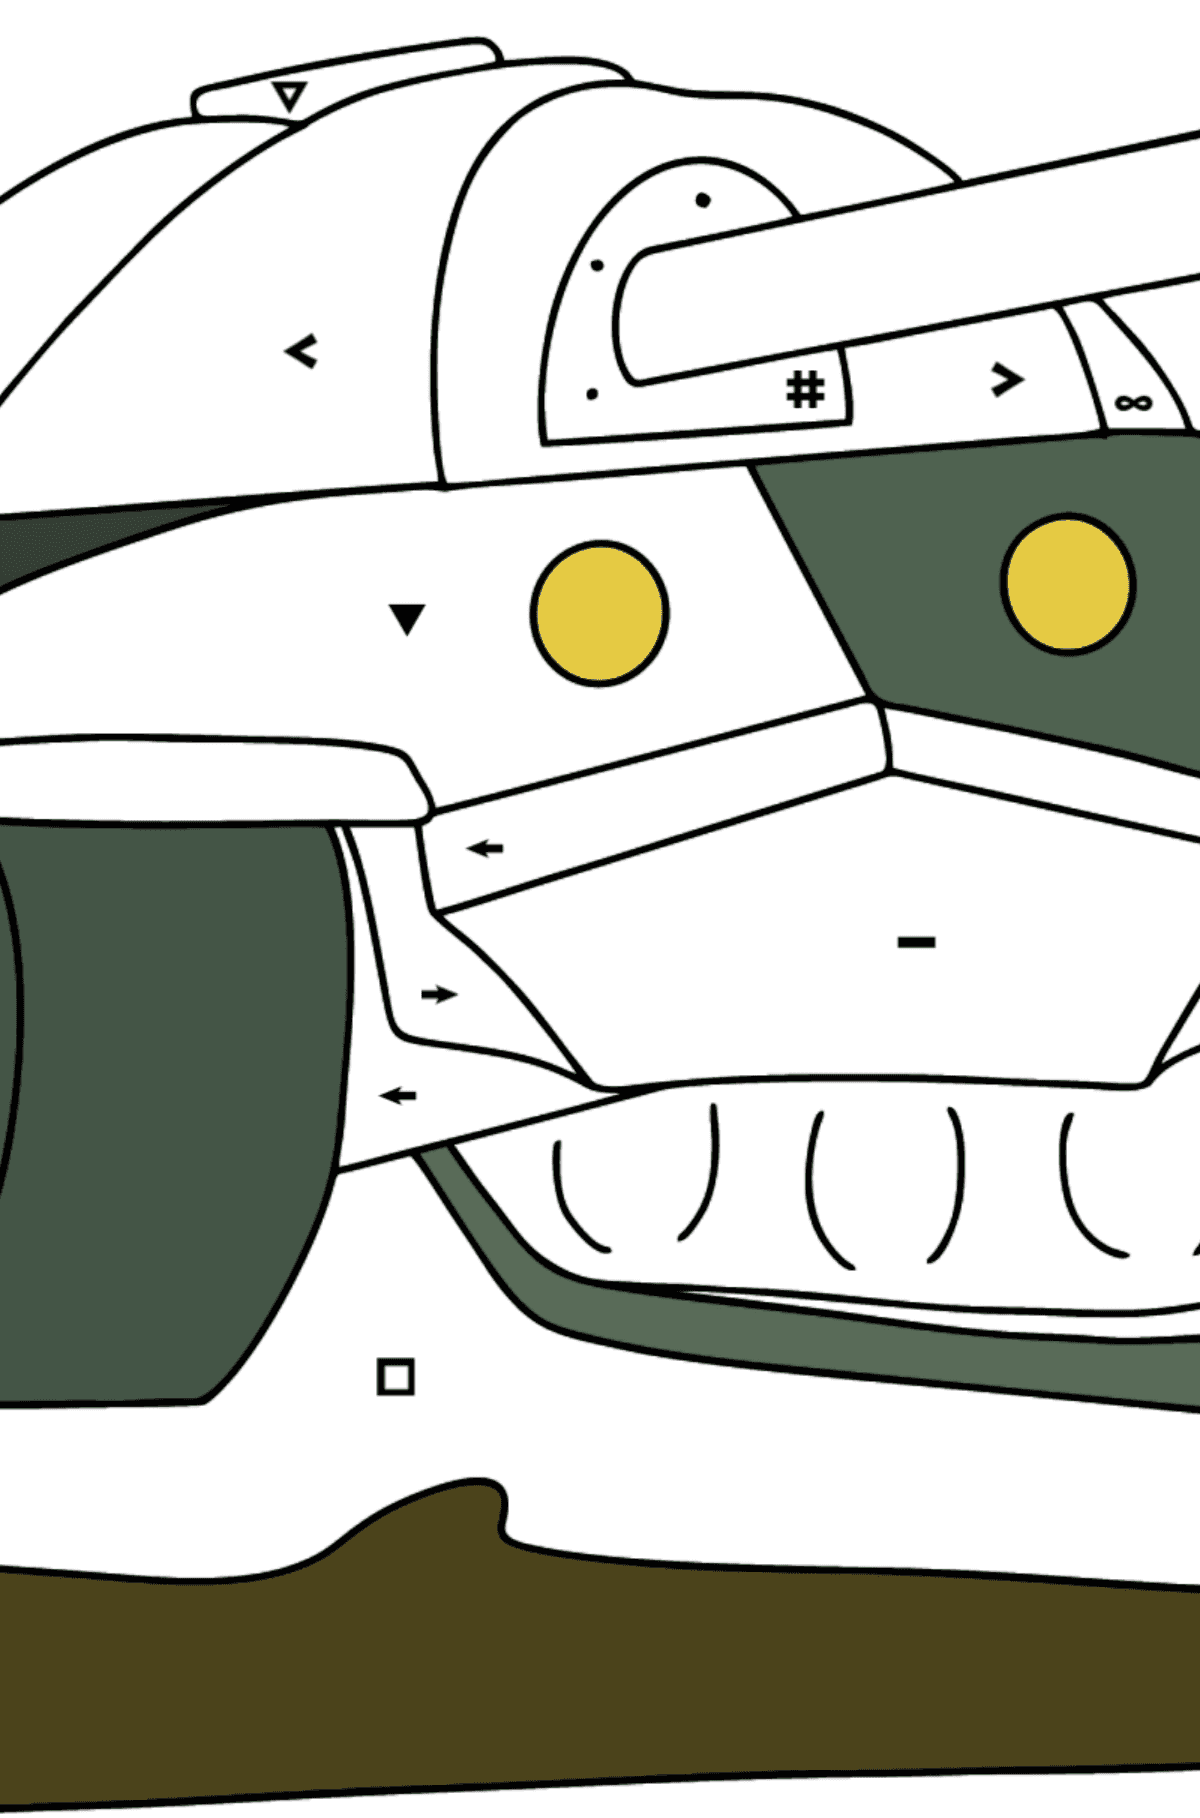 Tank IS 7 coloring page - Coloring by Symbols for Kids